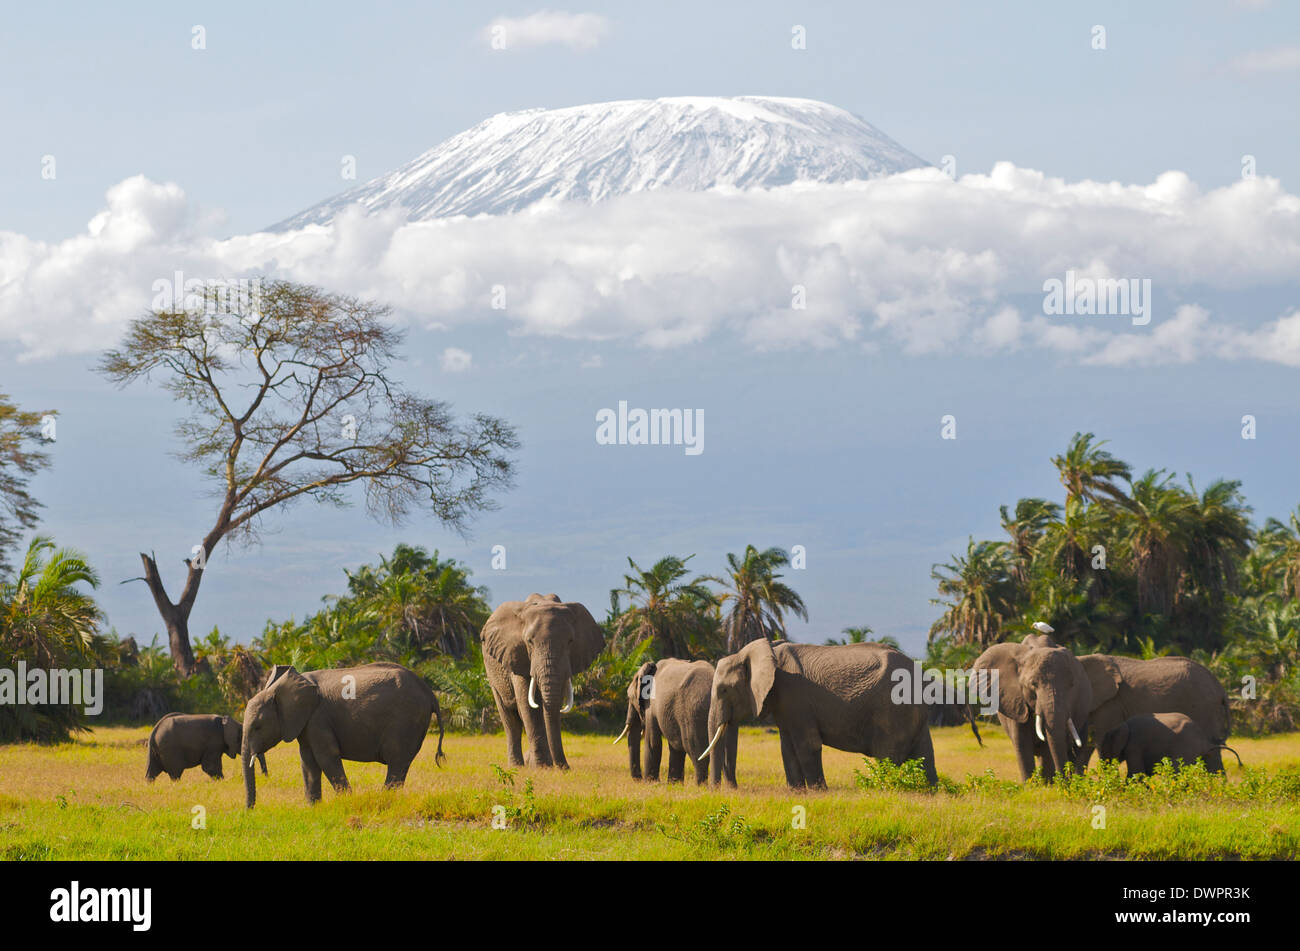 Bull Elephant (Loxodonta africana) in musth moves into small herd with snow capped Kilimanjaro in the background. Amboseli Kenya Stock Photo